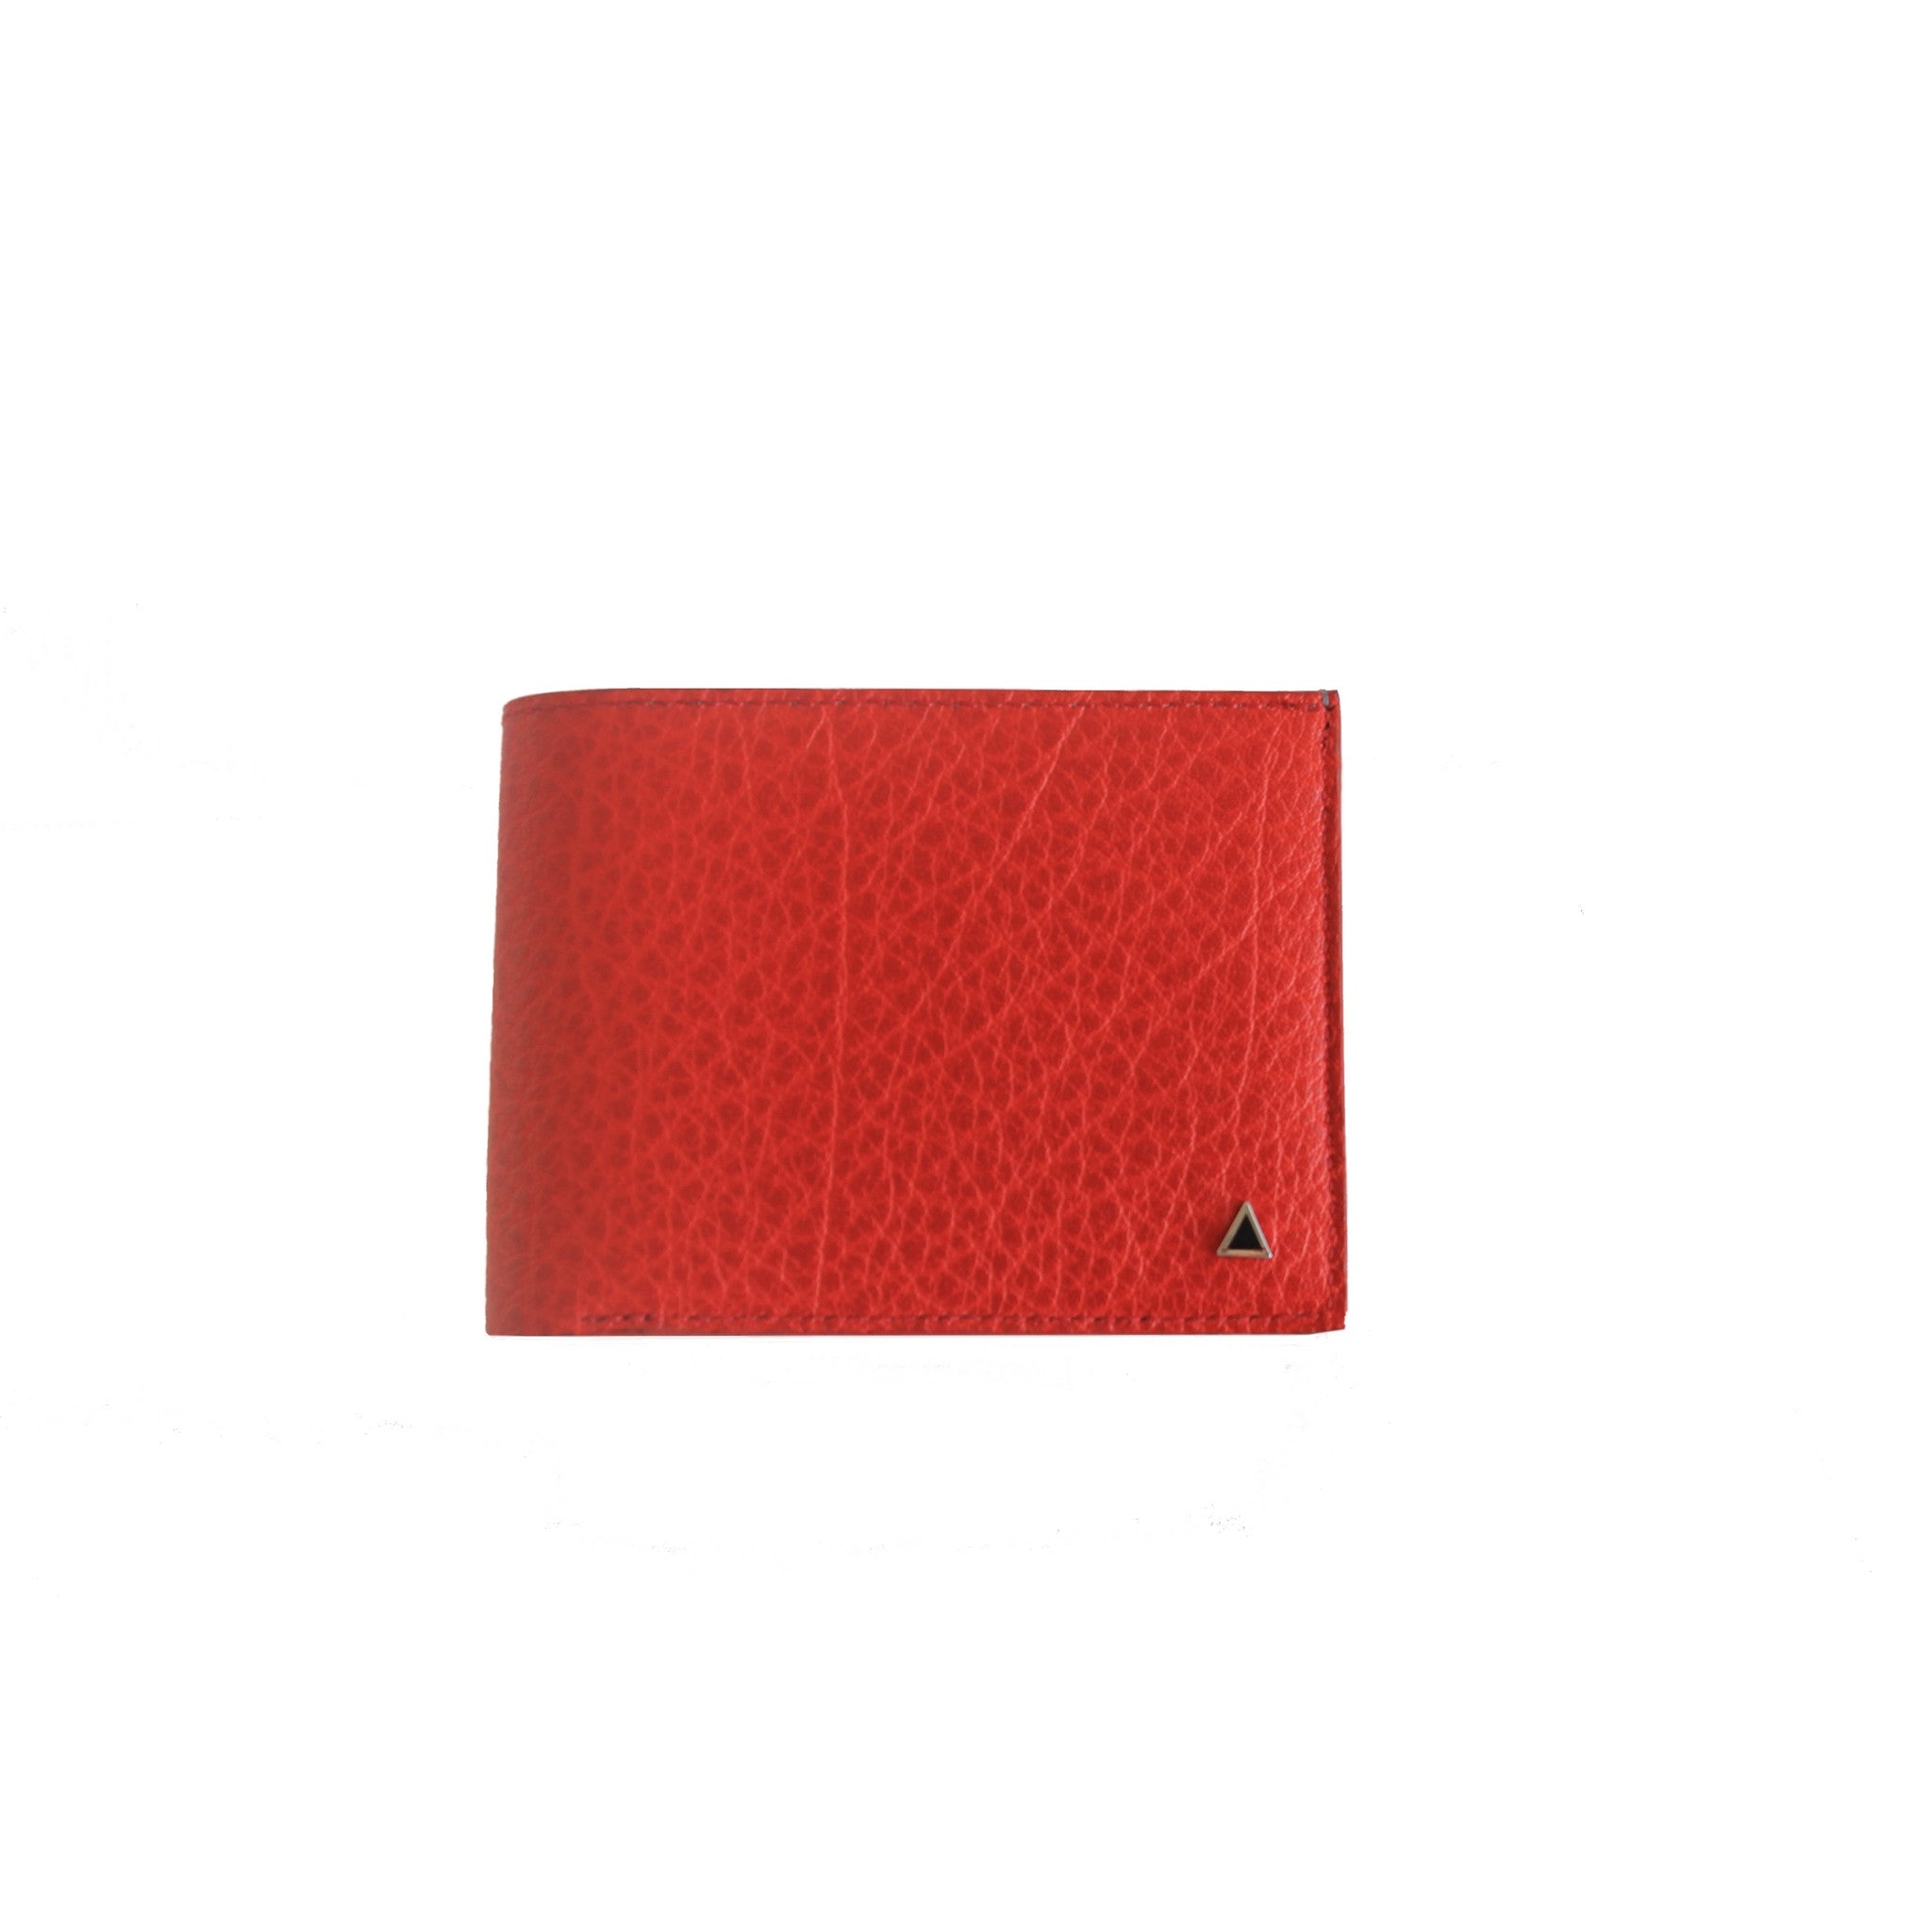 Made in FRANCE Gambetta Luxury Wallet in Black Taurillon by Anonyme Pa - La  Perfection Louis